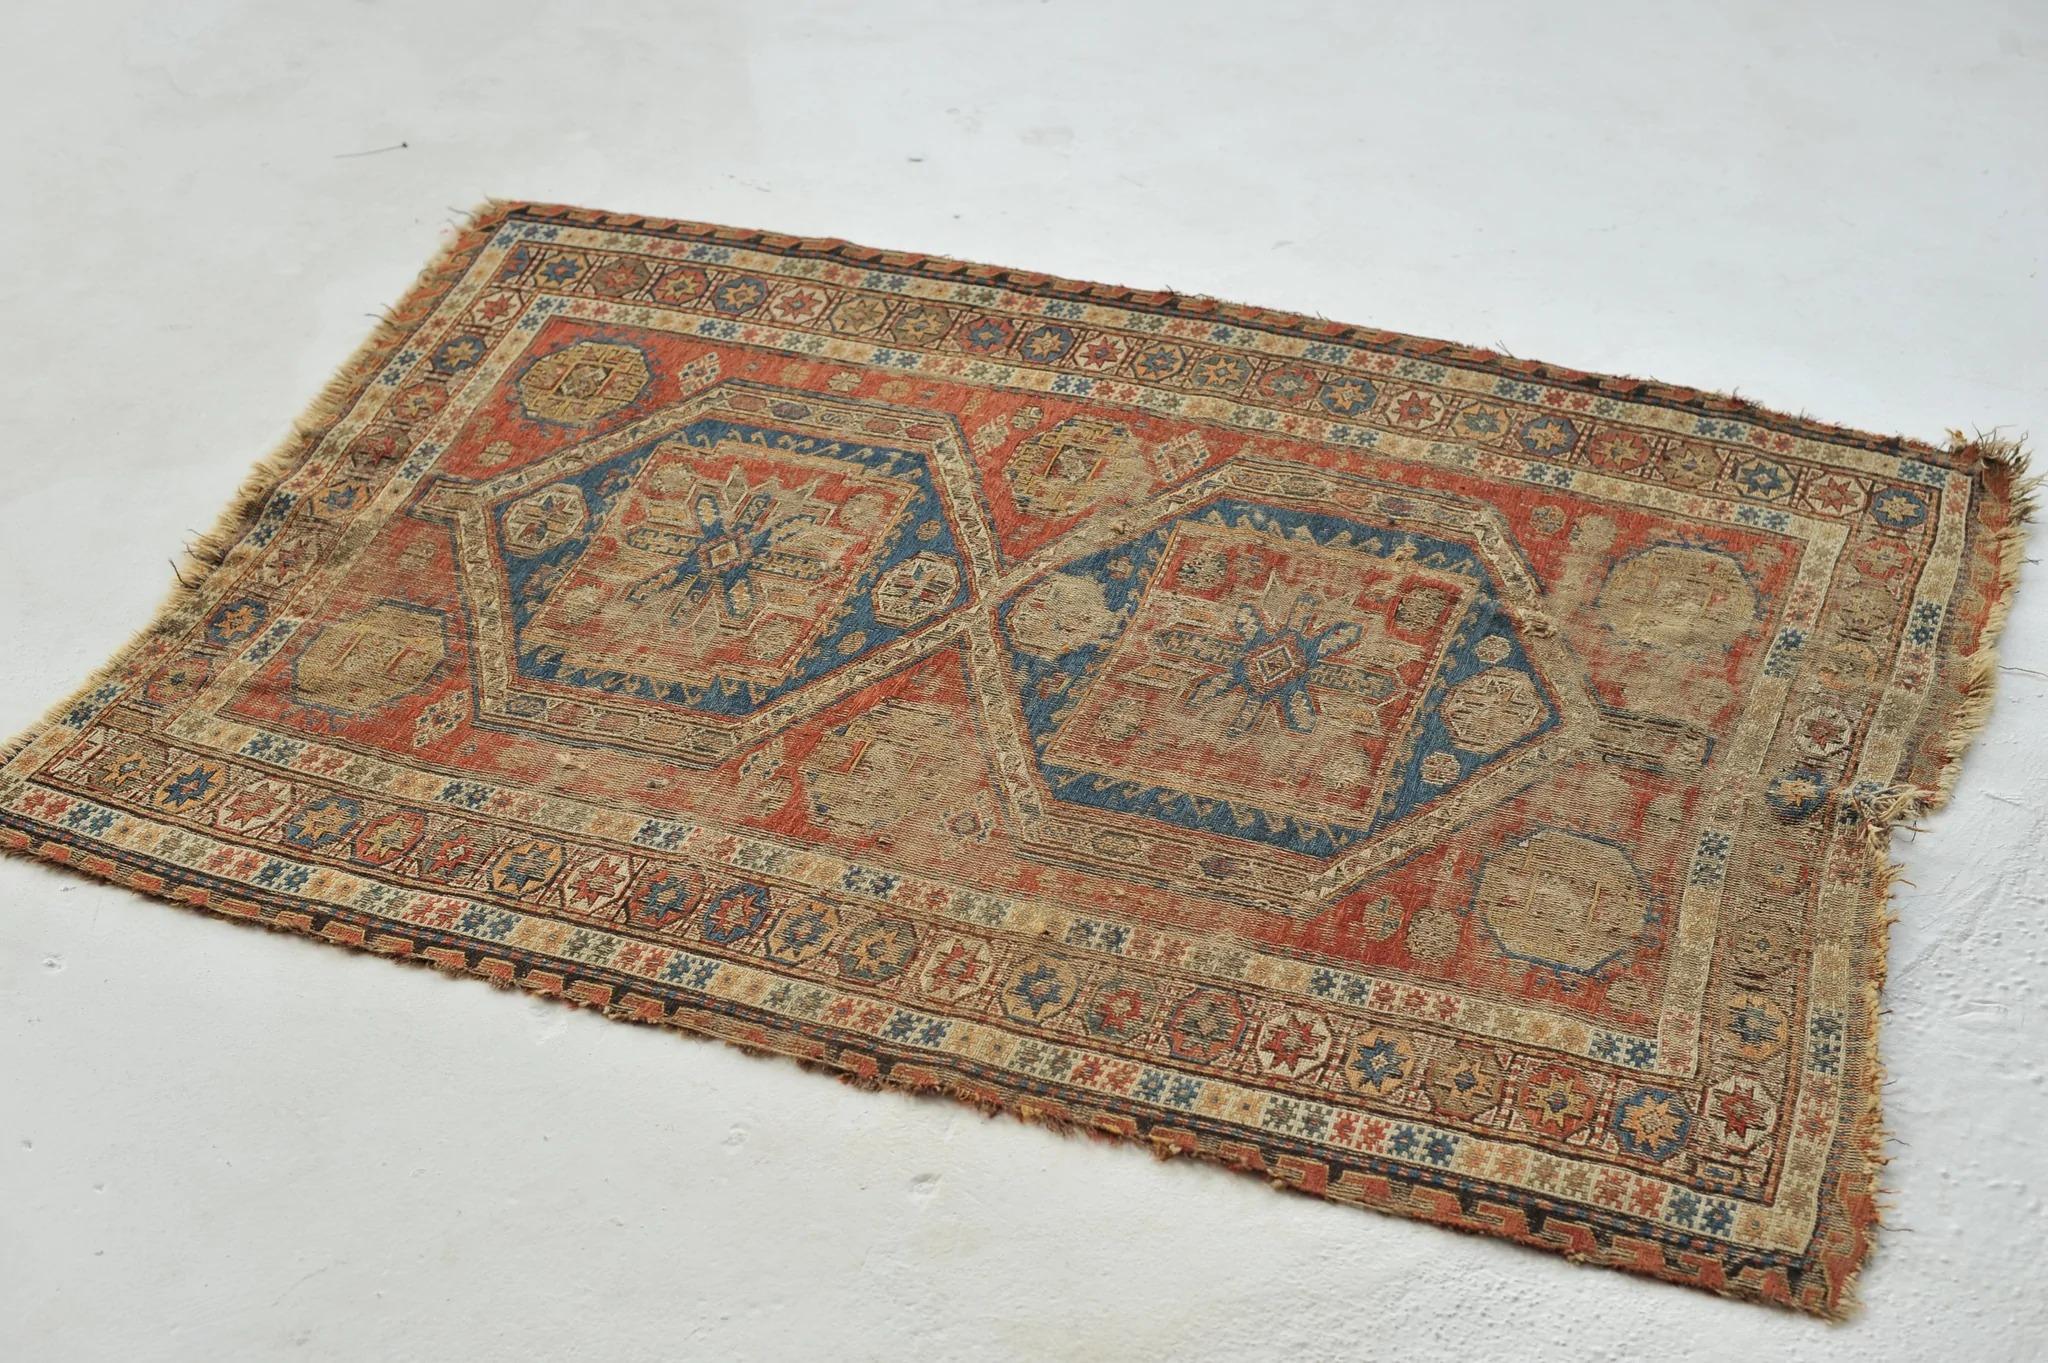 Antique Sumac Worn, Distressed and Character-Rich Rug

About: Older than you think, perhaps turn of the century or even last quarter of the 19th century - this piece dazzles our eyes with its patina and charm - so much character from pieces this